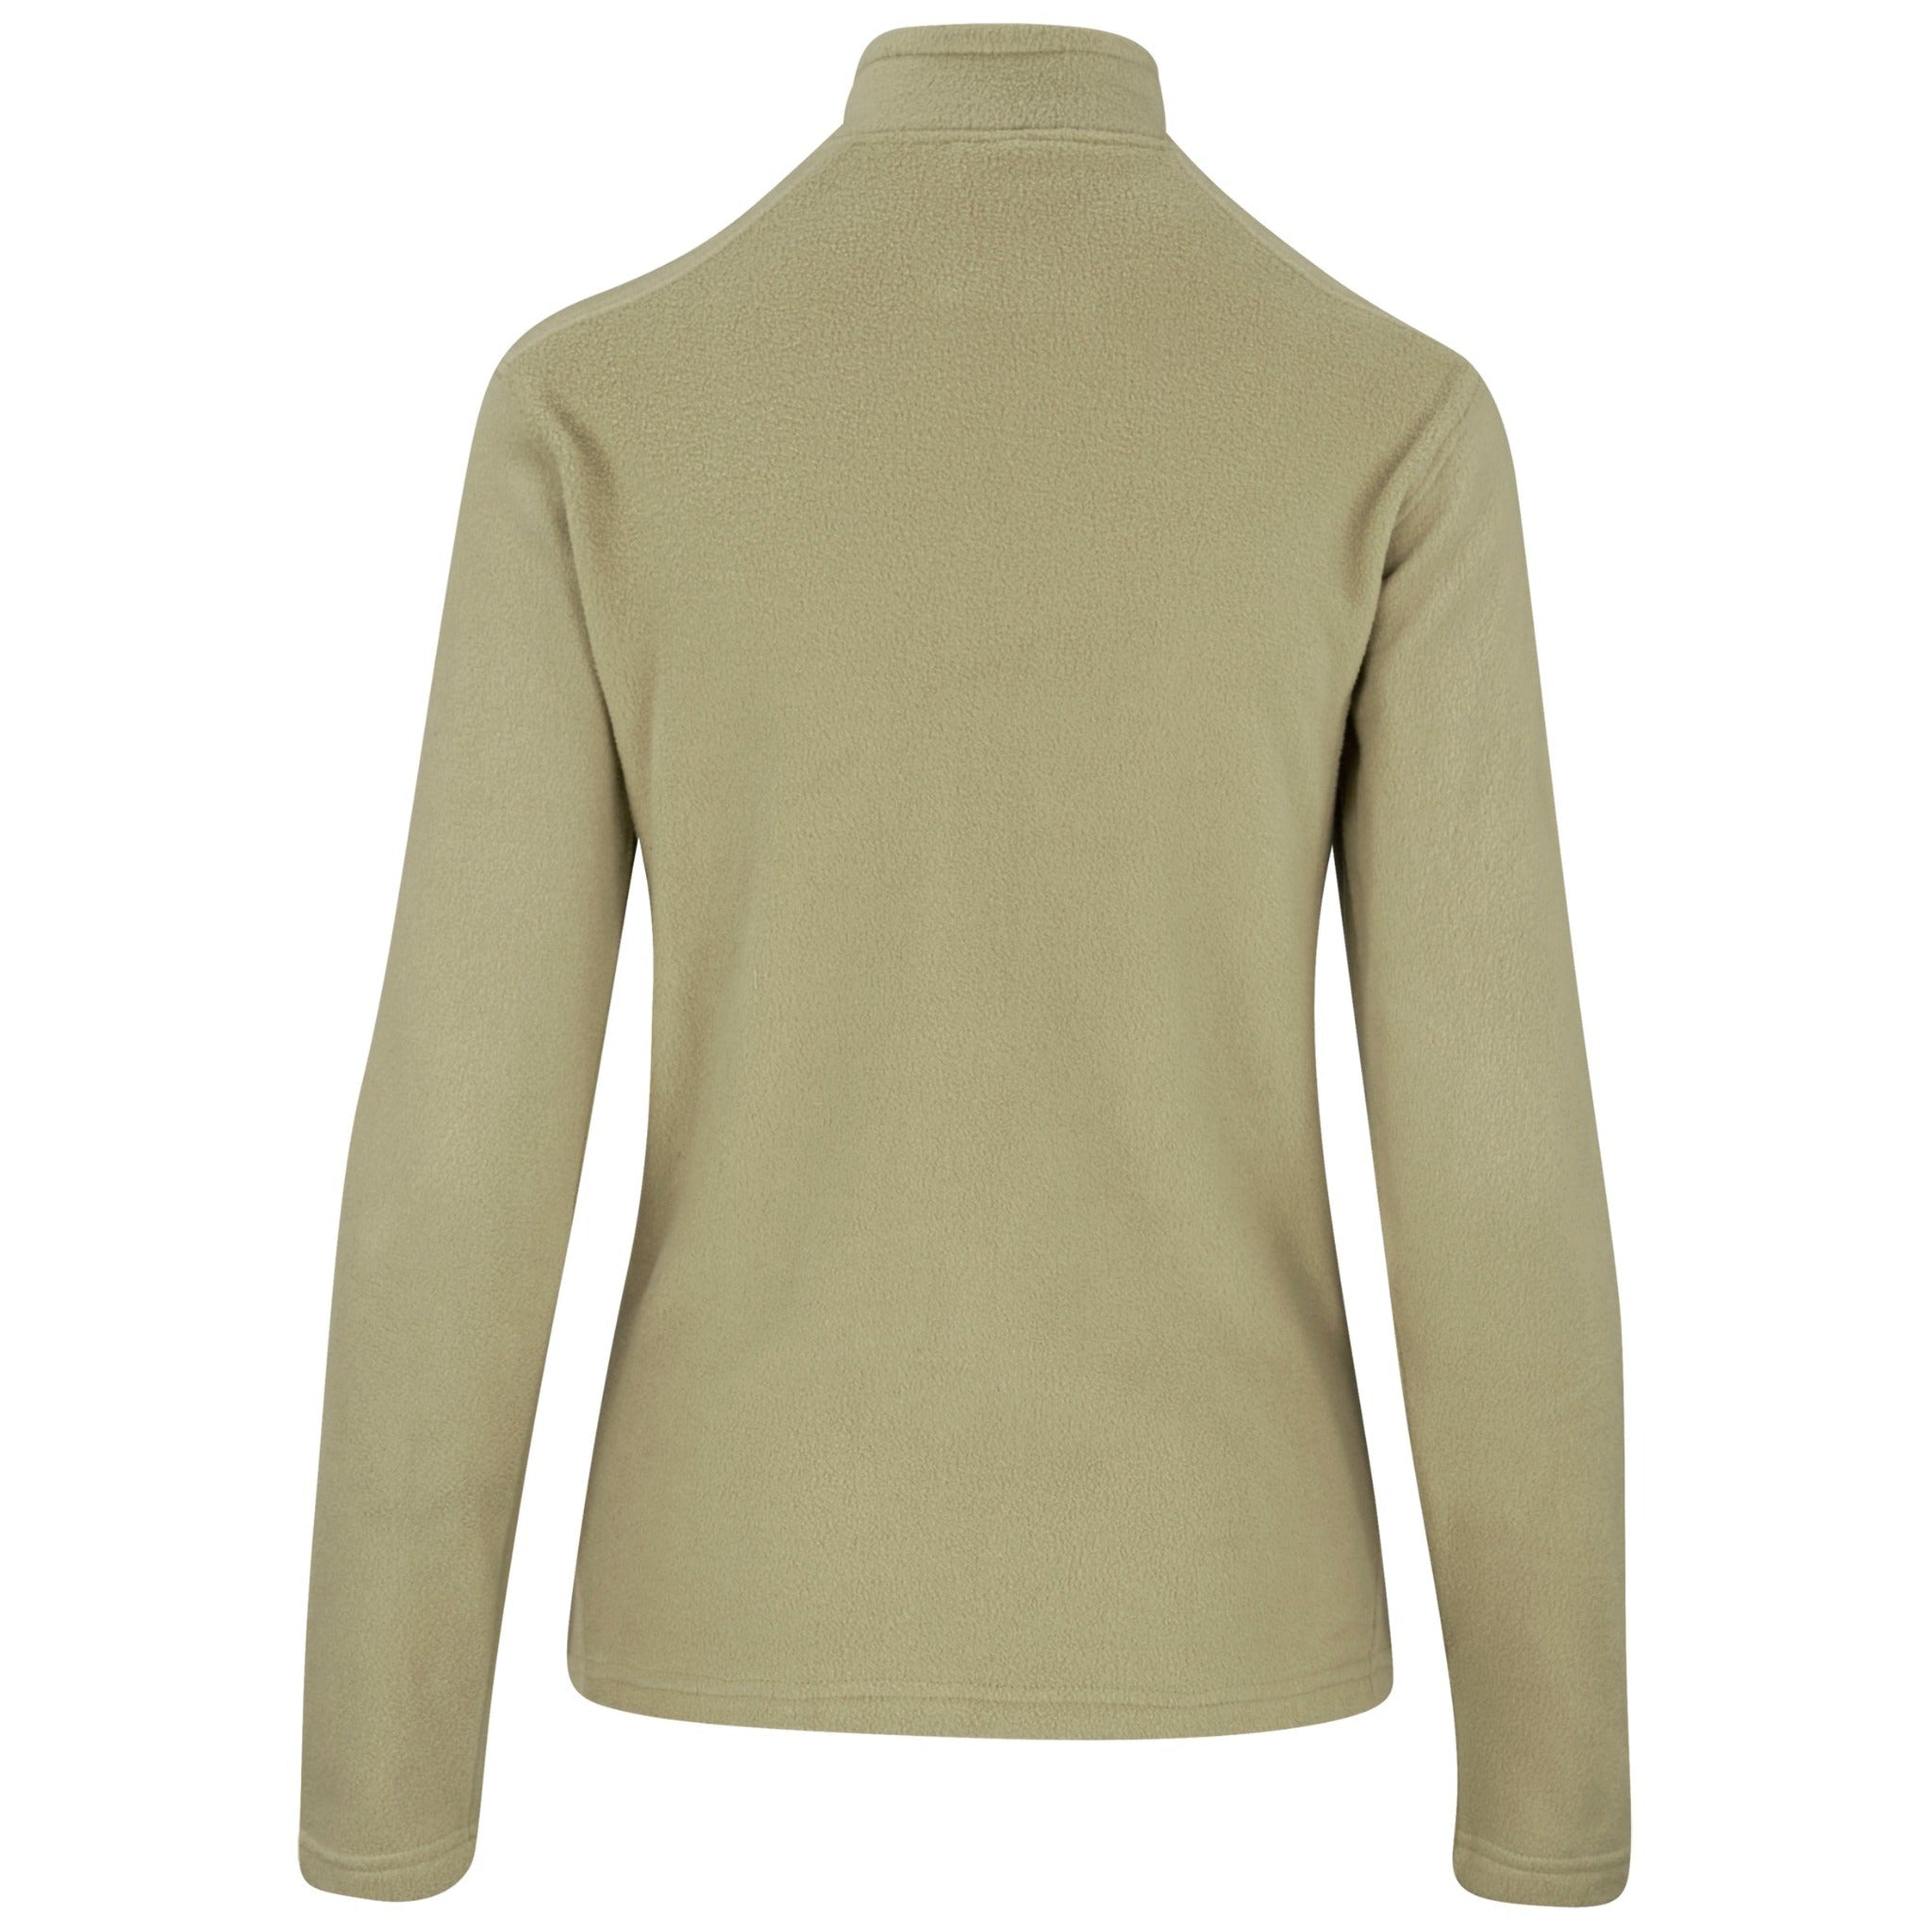 Back view of a ladies stone-coloured micro fleece jacket.